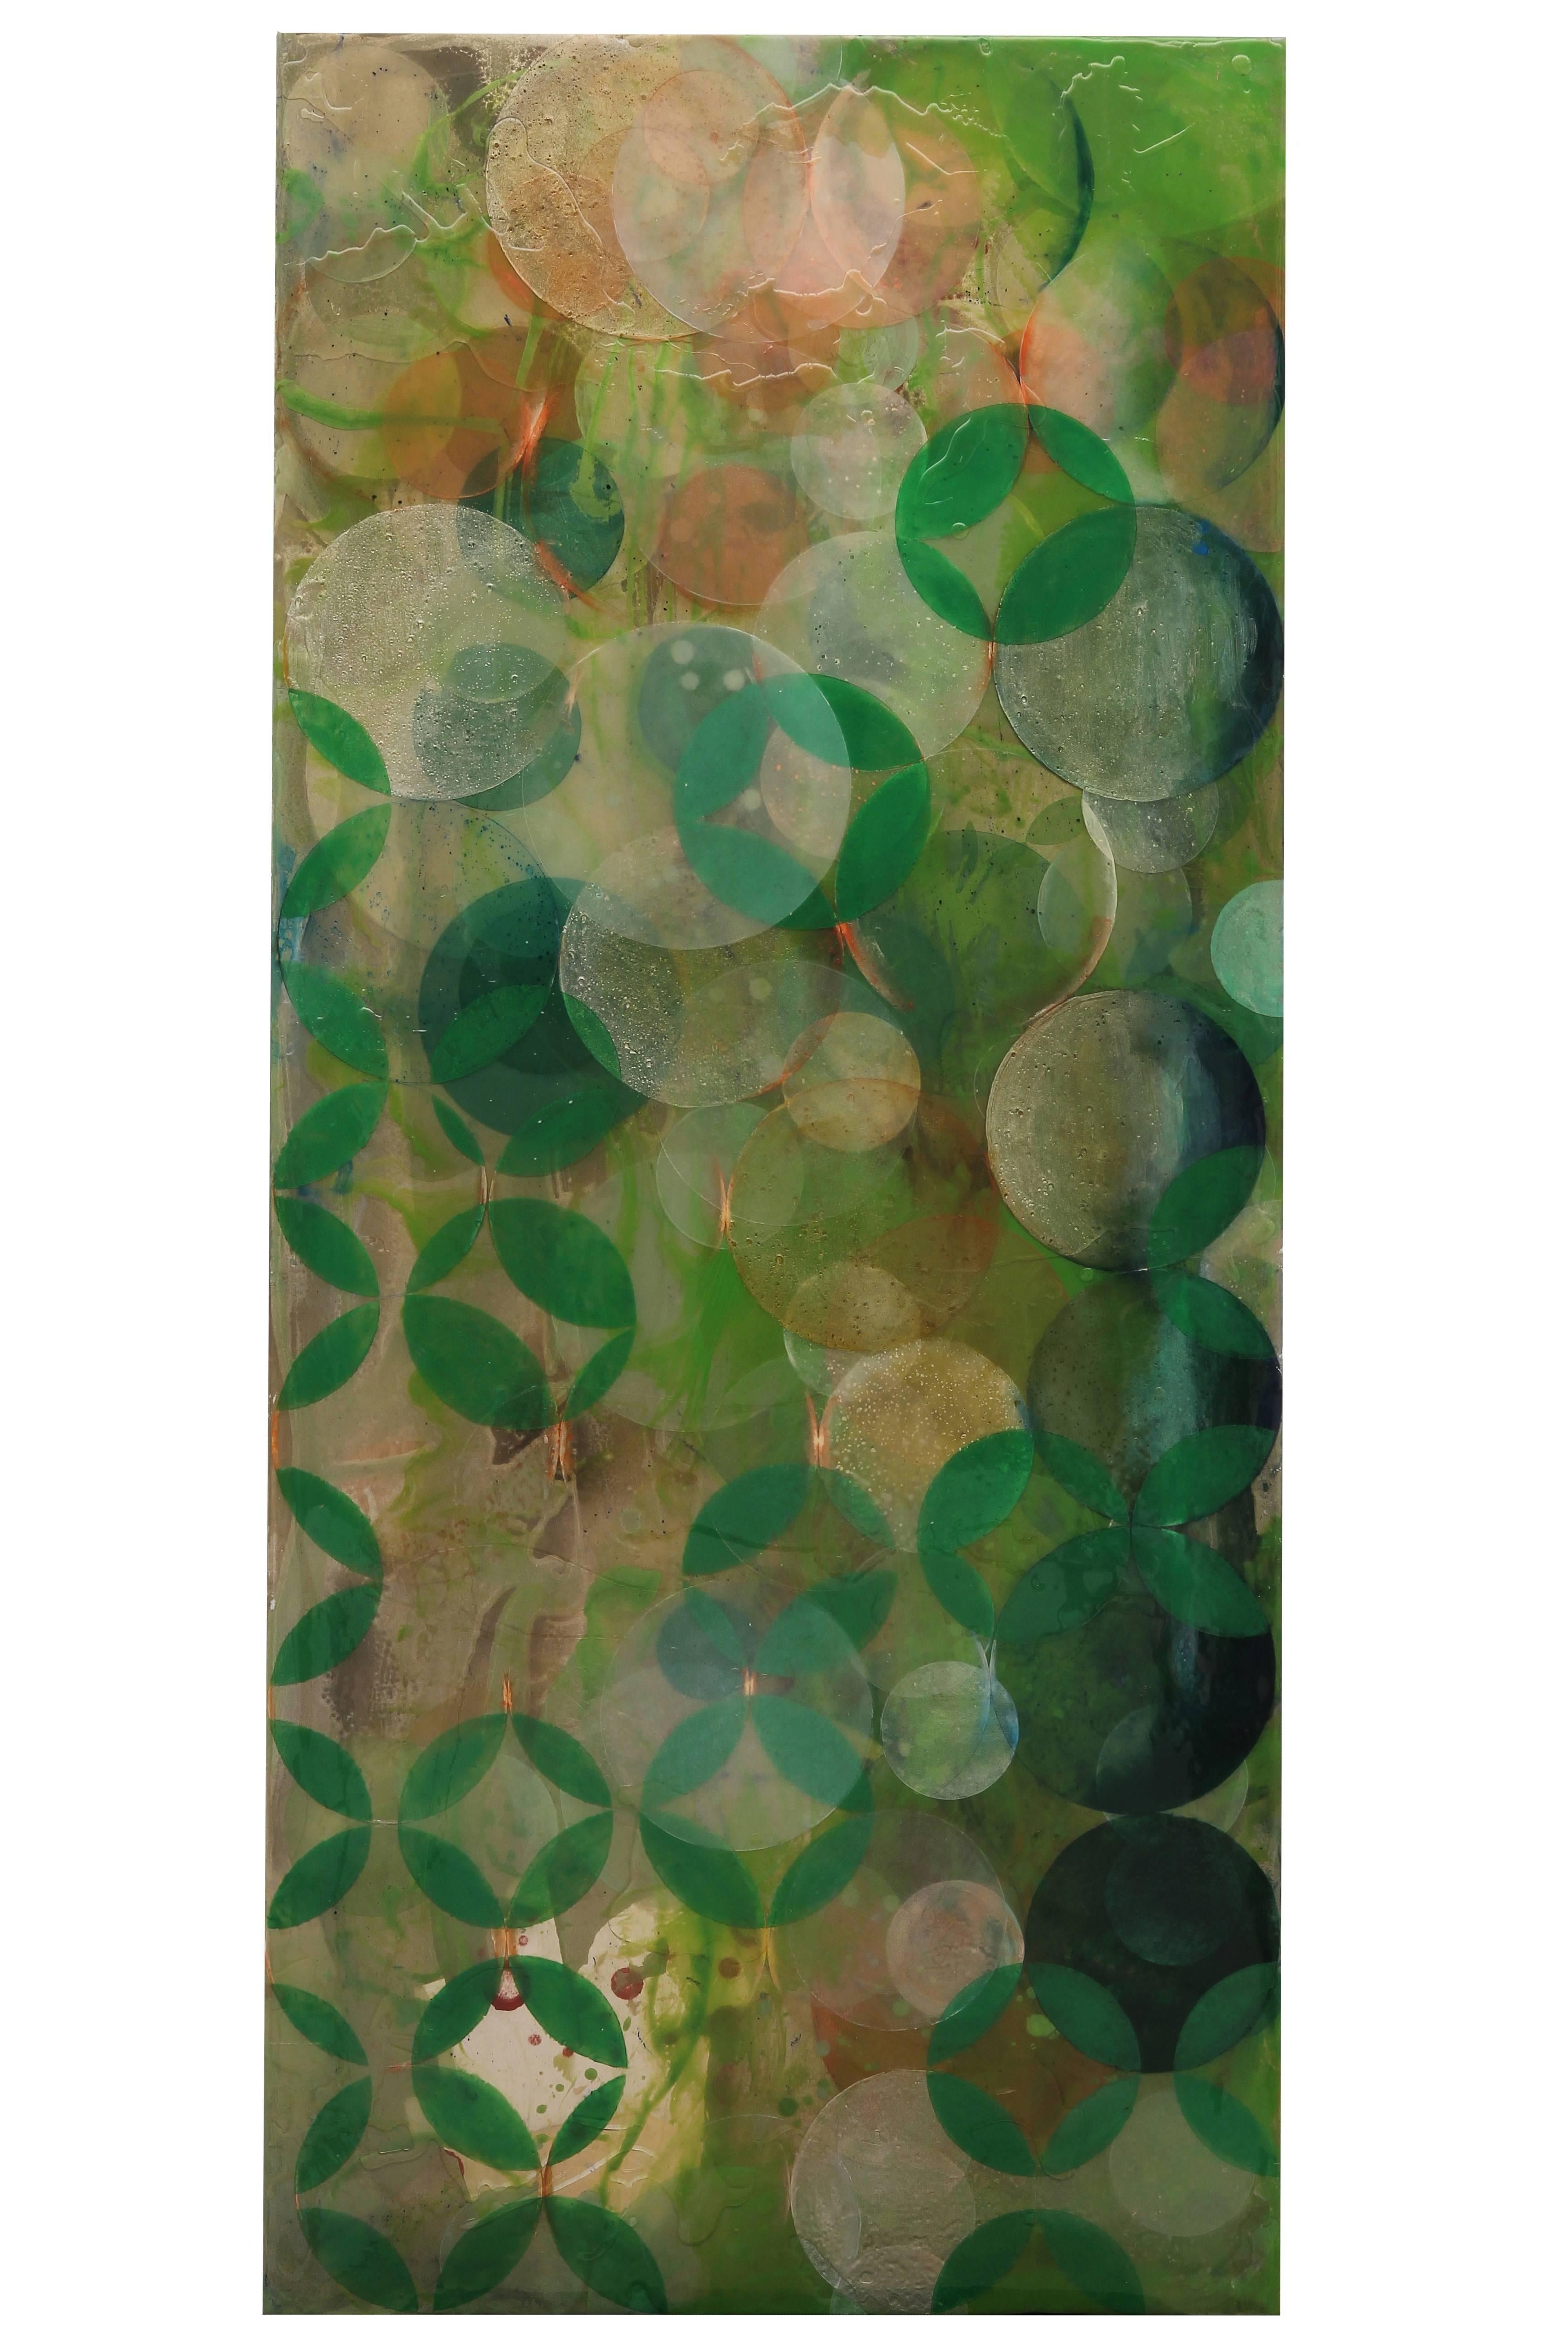 Everlasting Spring / mixed media, oil, resin on mirrored wood - Painting by Erin Parish